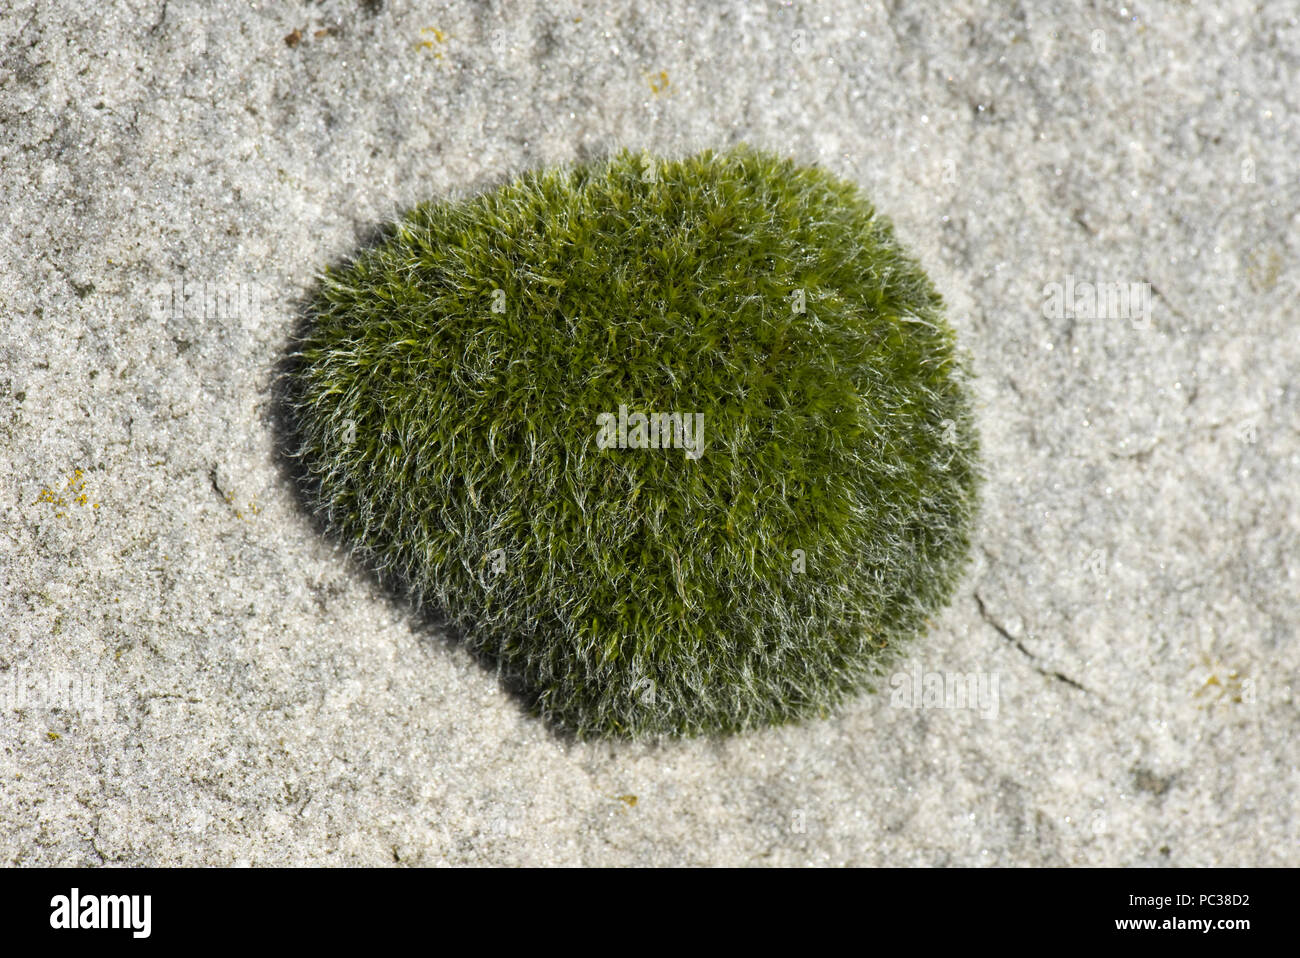 Gametophyte cusion of wall screw-moss, Tortula muralis, growing on a large sarson stone, Berkshire, March Stock Photo